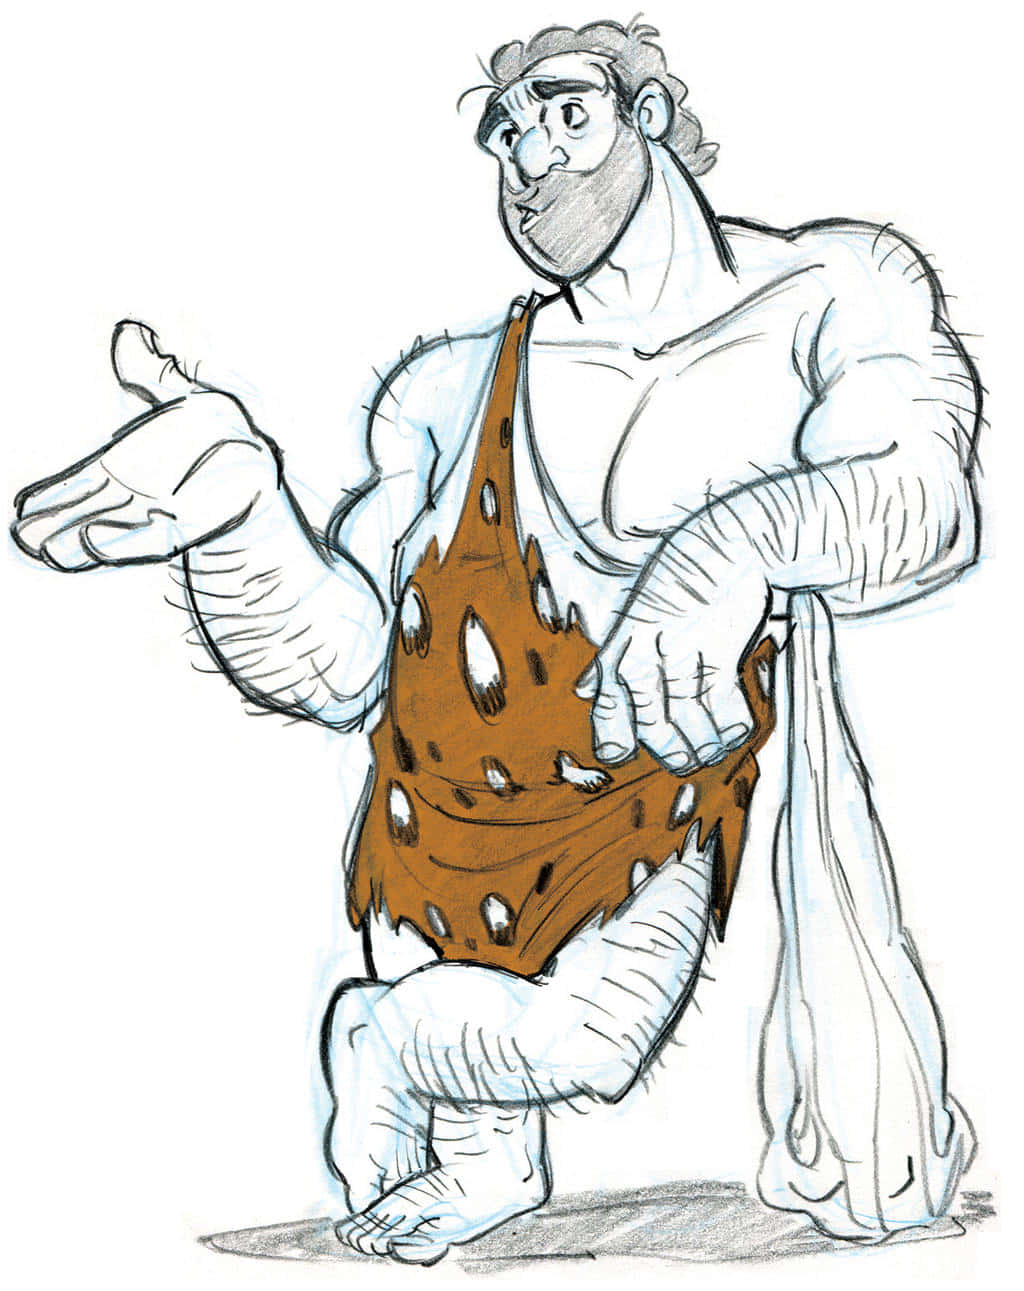 A Drawing Of A Man In A Caveman Costume